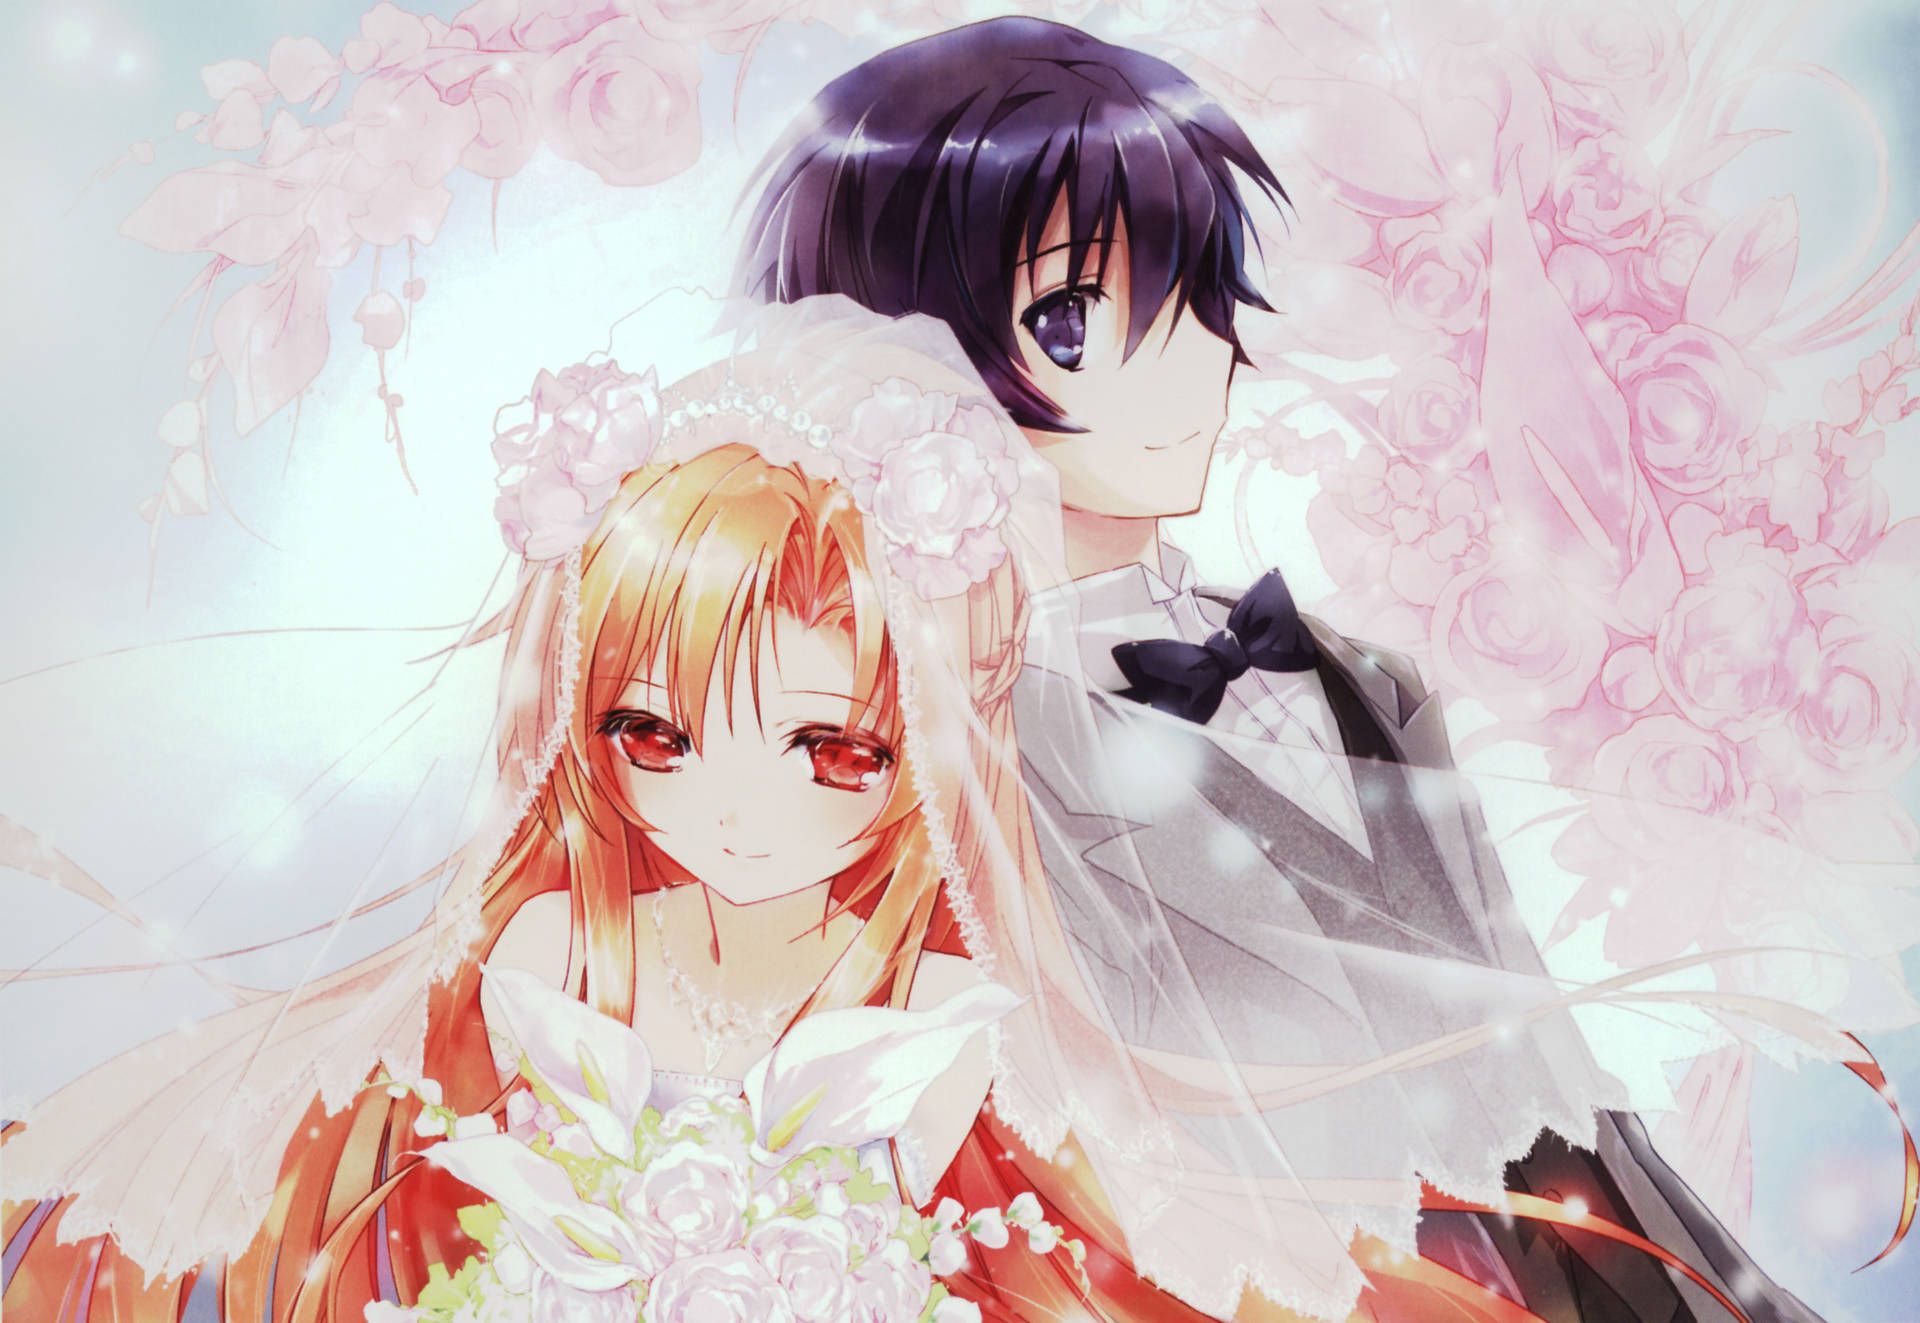 A couple of anime characters in wedding attire - Wedding